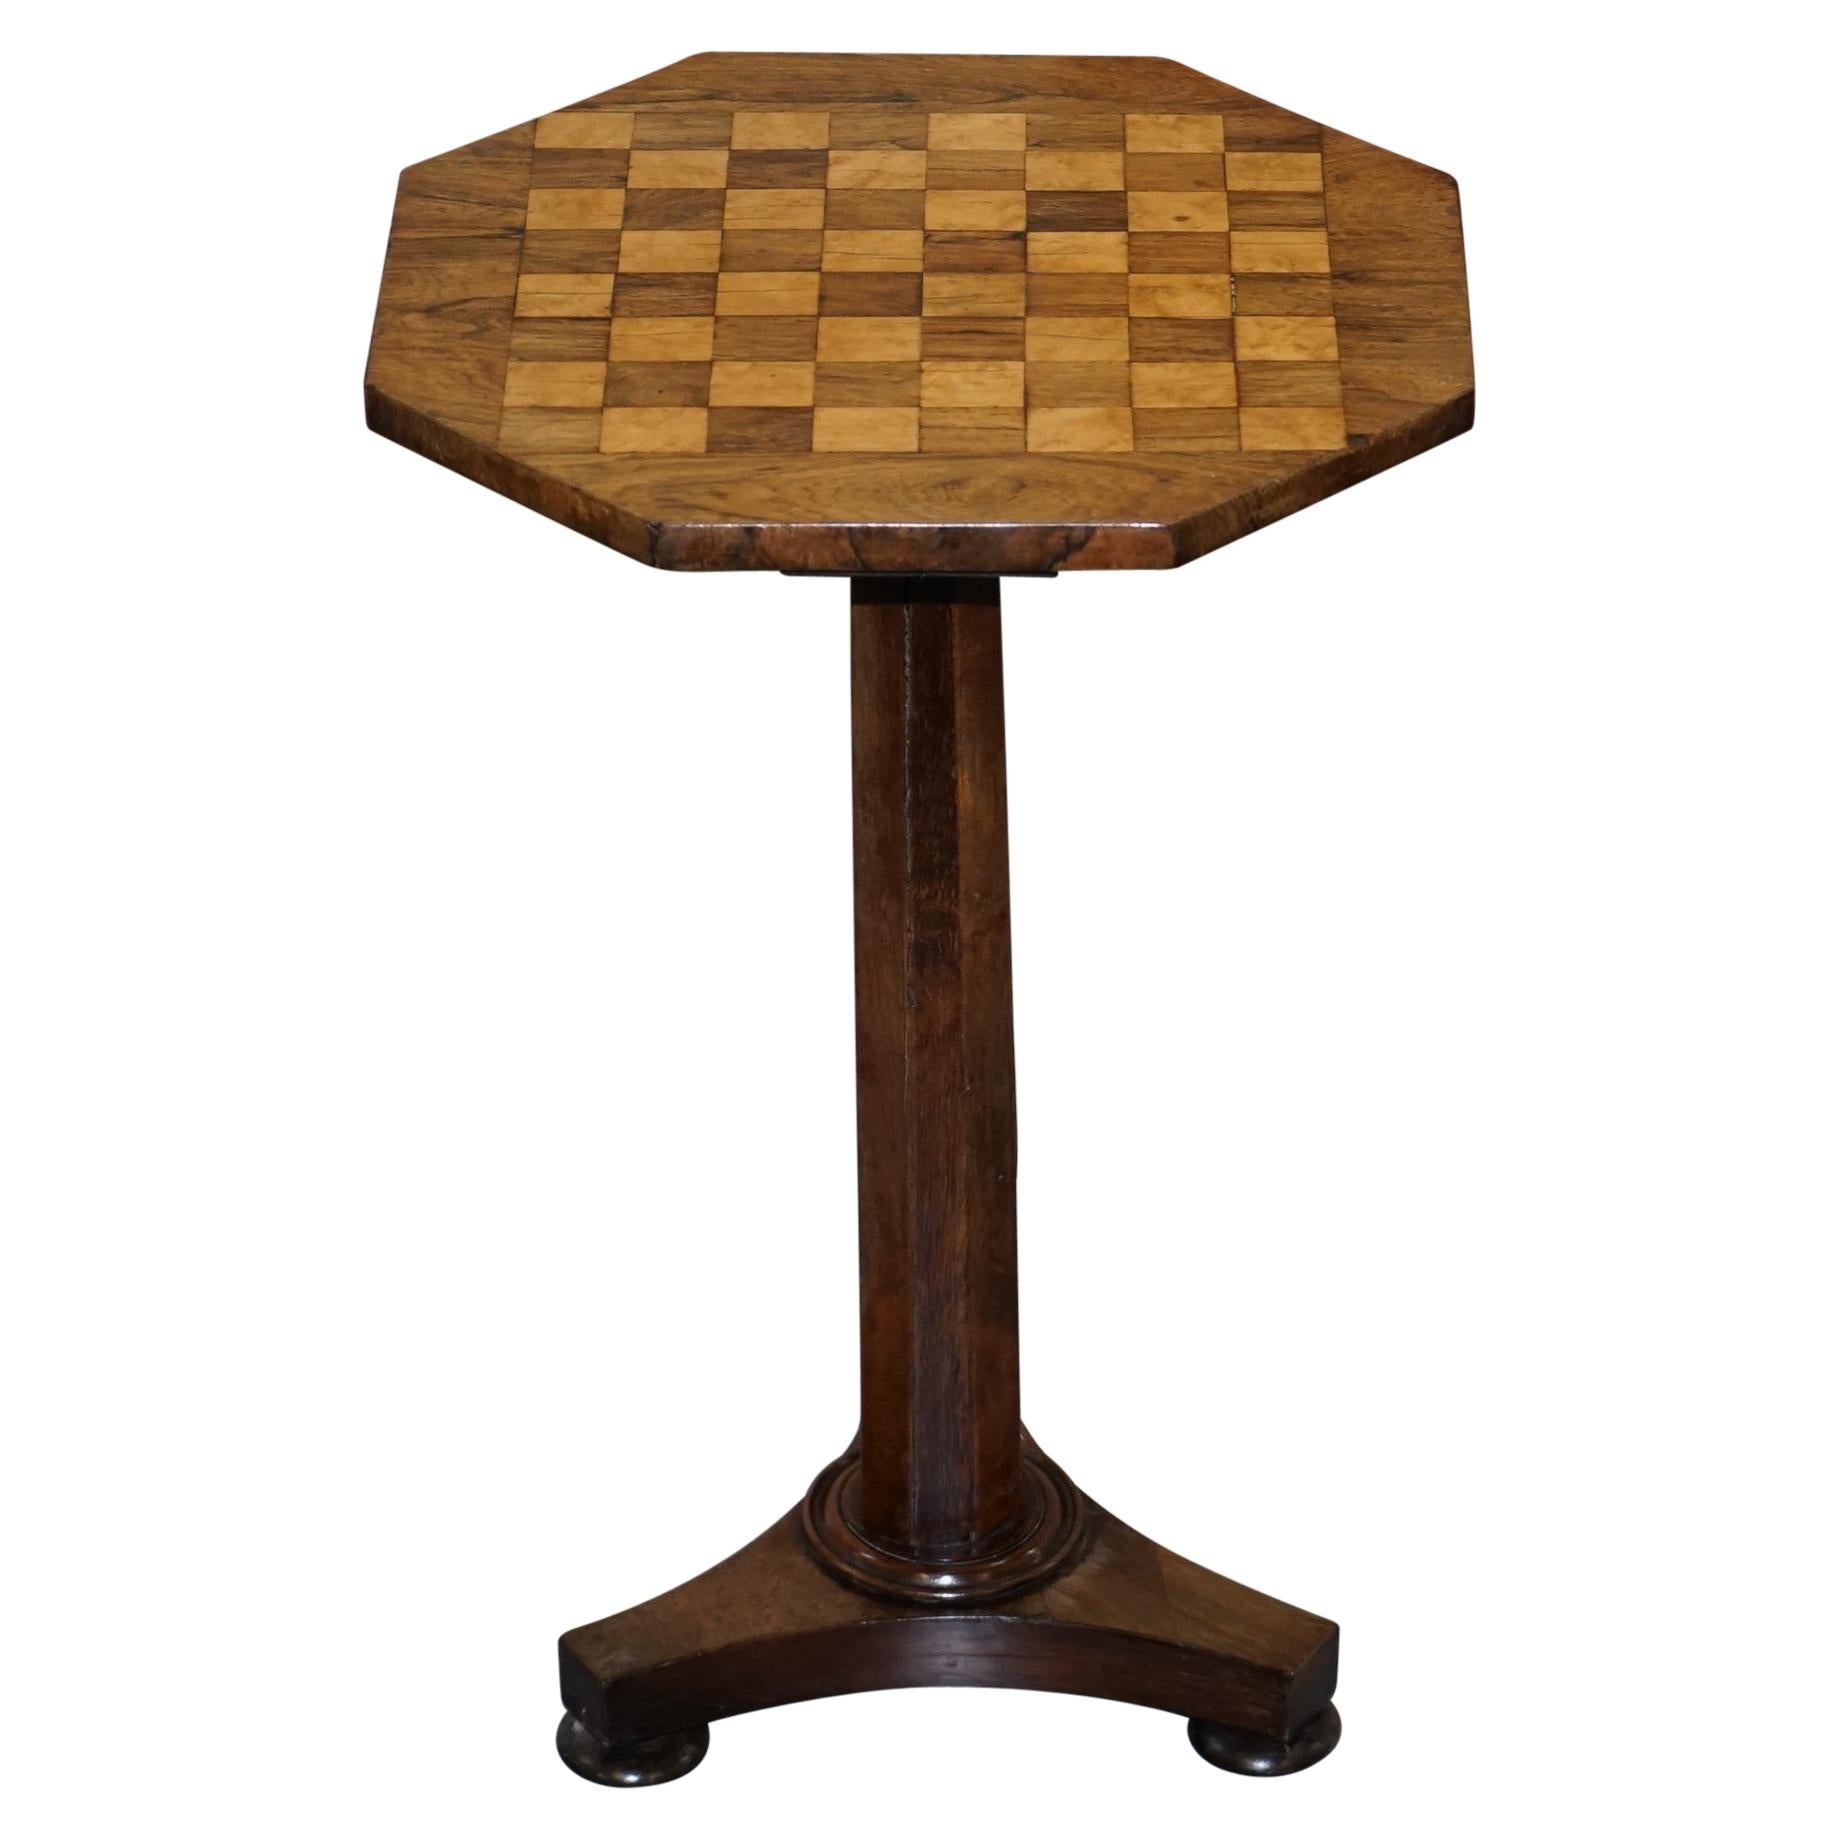 Stunning Victorian 1860 Redwood Pedestal Chess Games Checkers Backgammon Table